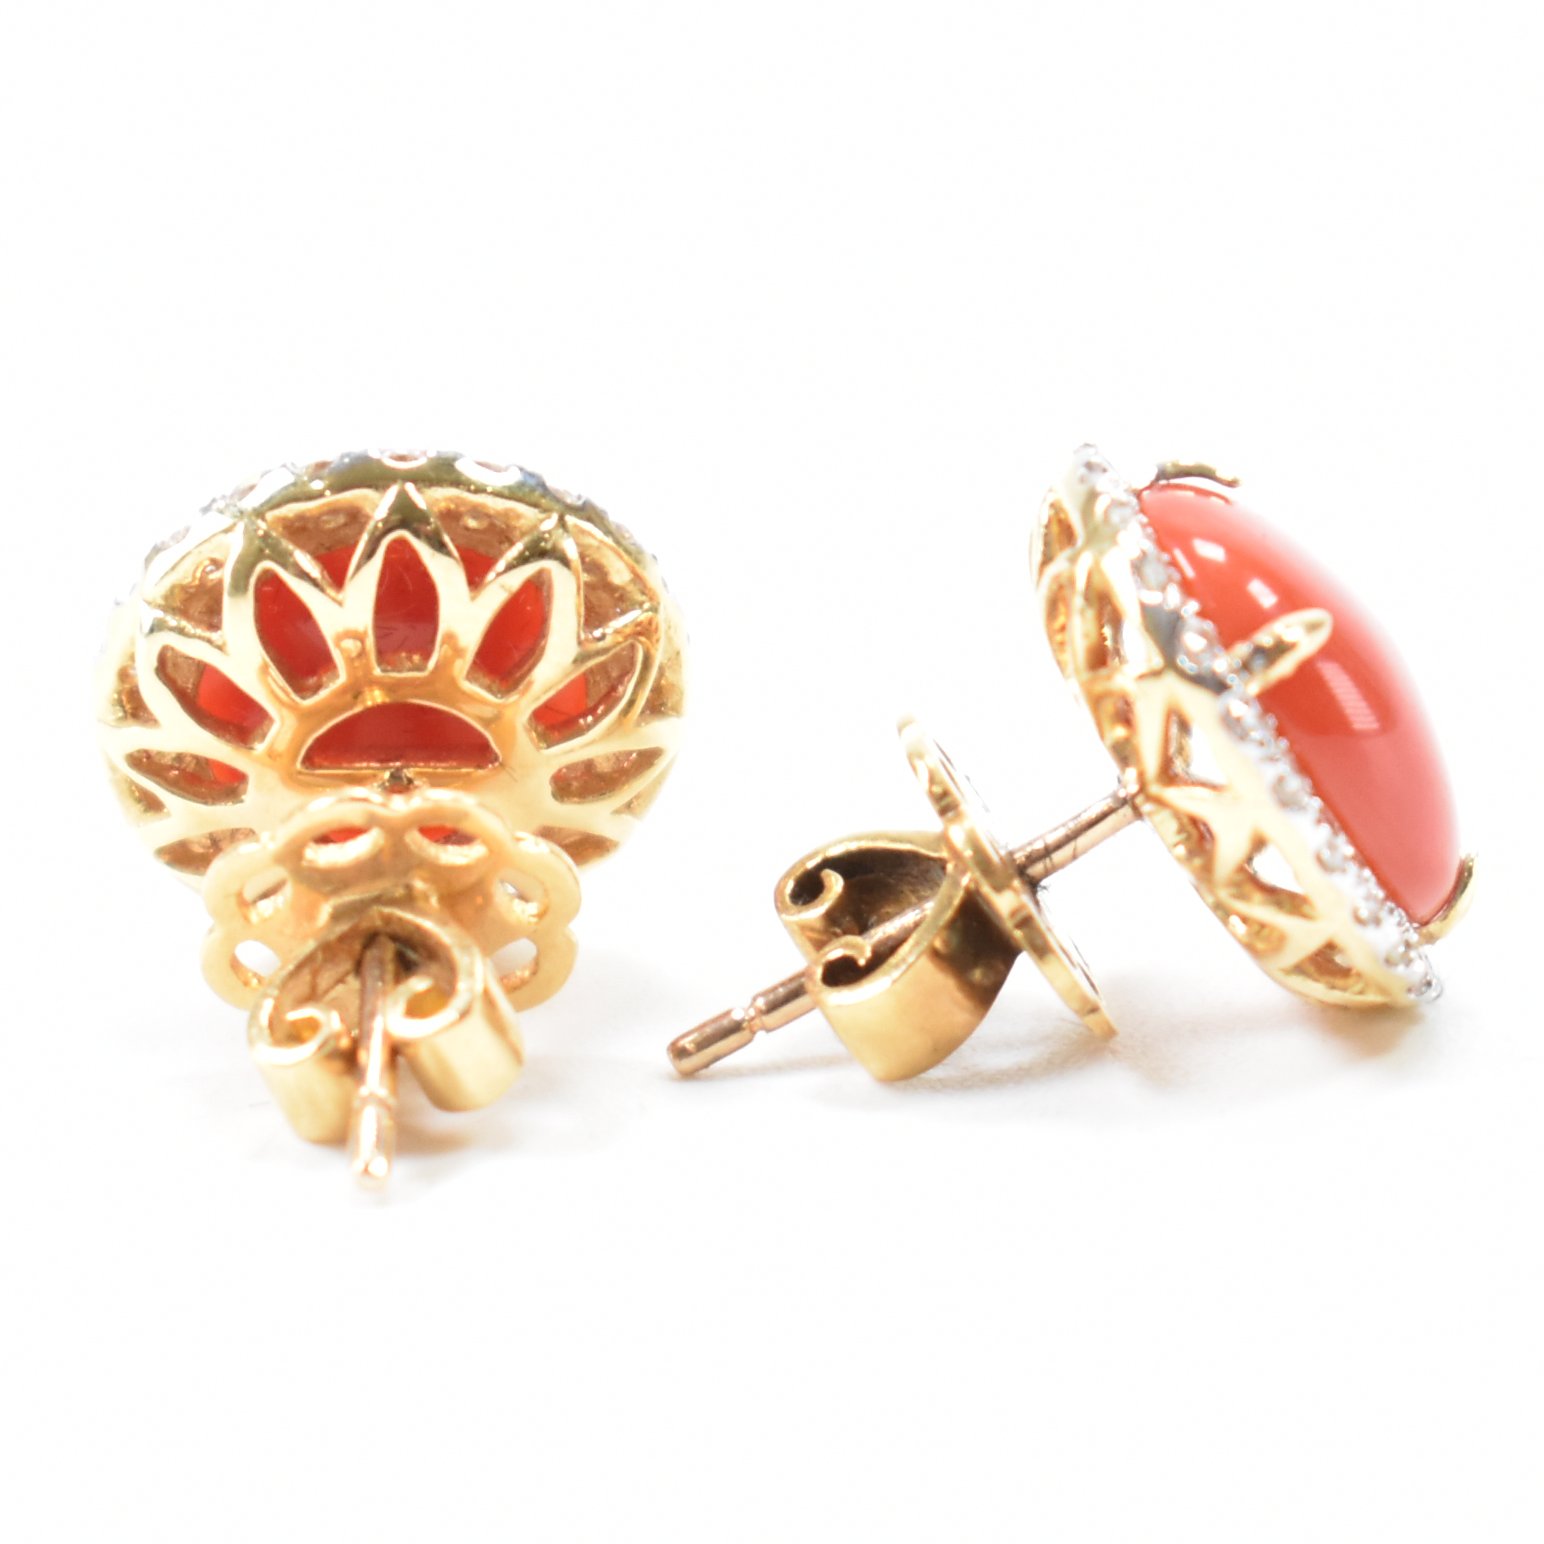 PAIR OF 18CT GOLD CORAL & DIAMOND EARRINGS - Image 3 of 4